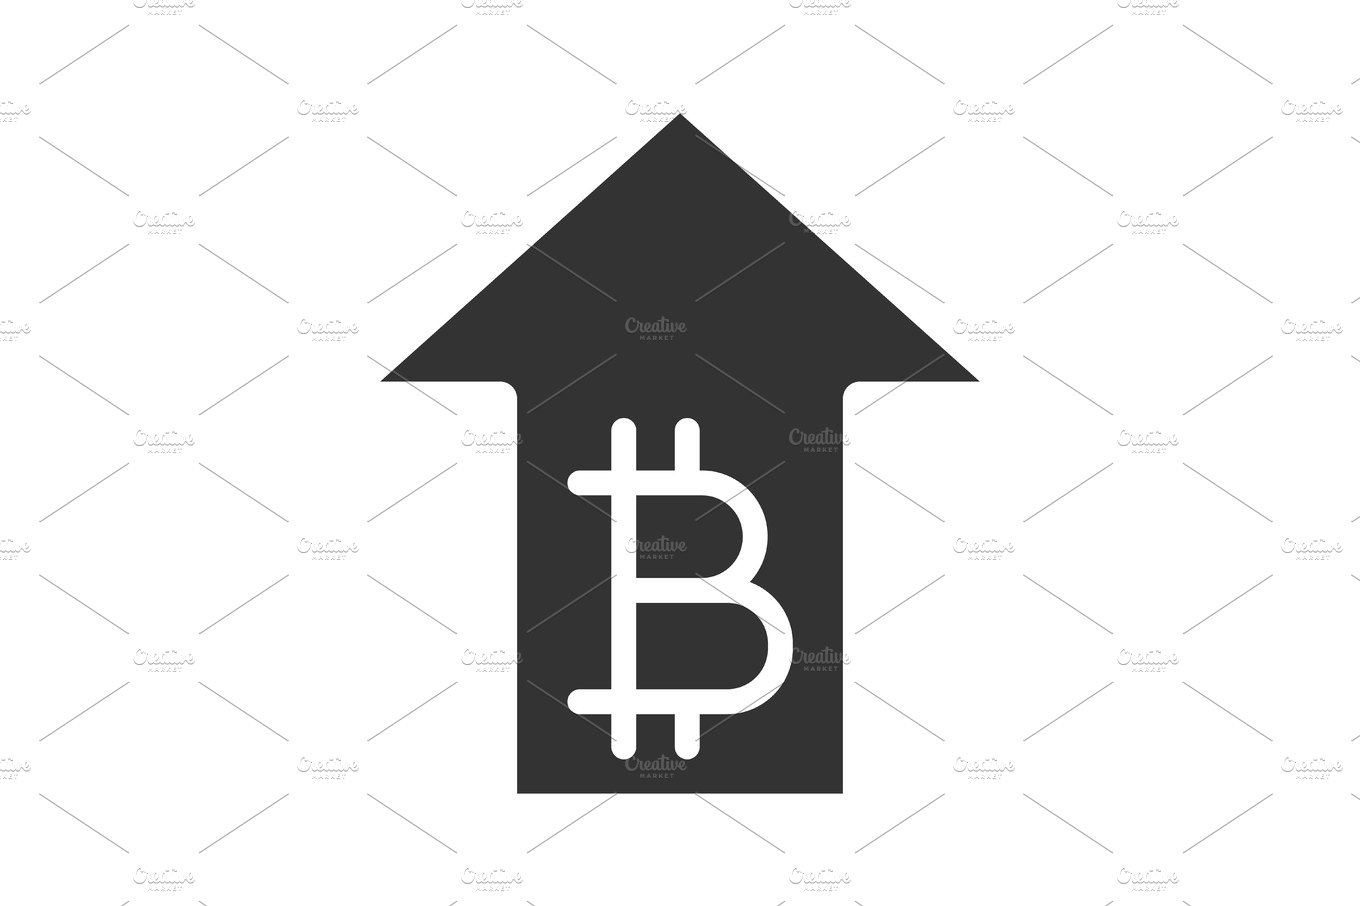 Bitcoin rate rising glyph icon cover image.